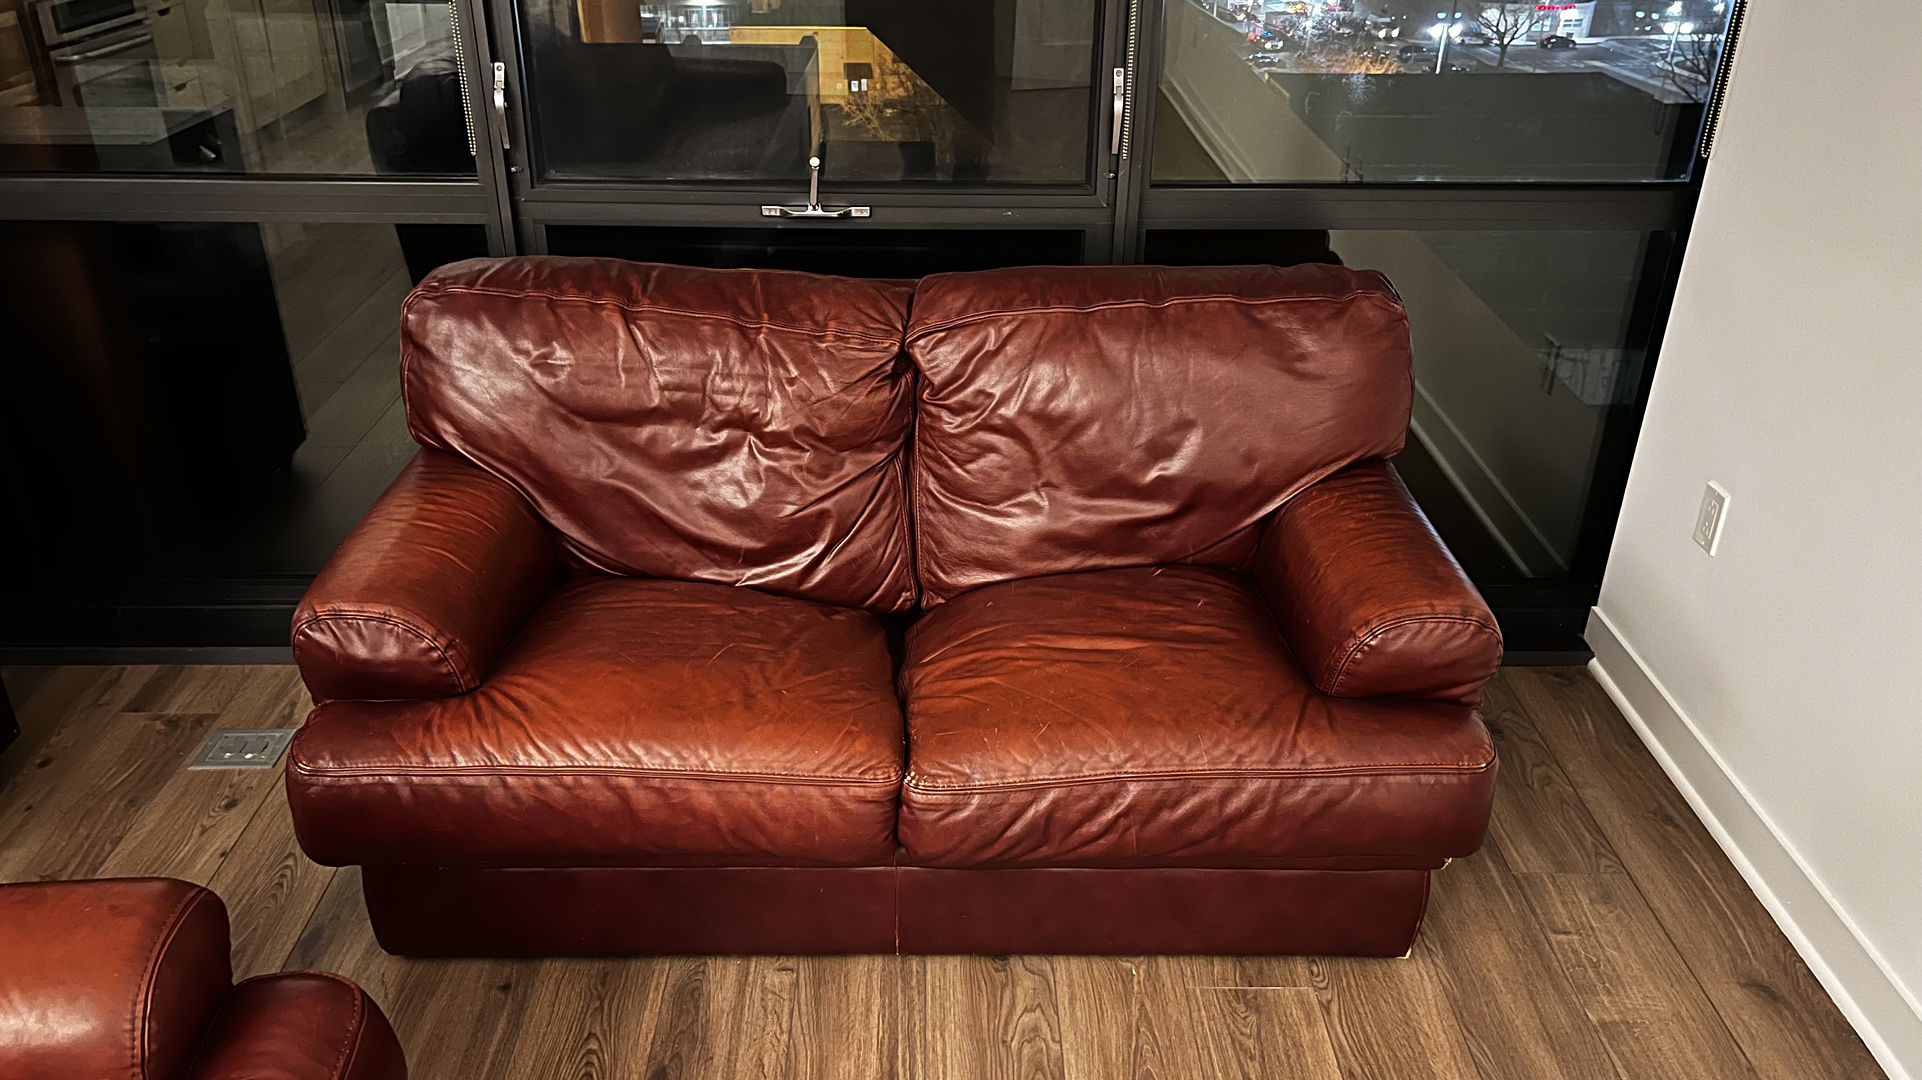 Two Rustic Italian Leather Couches